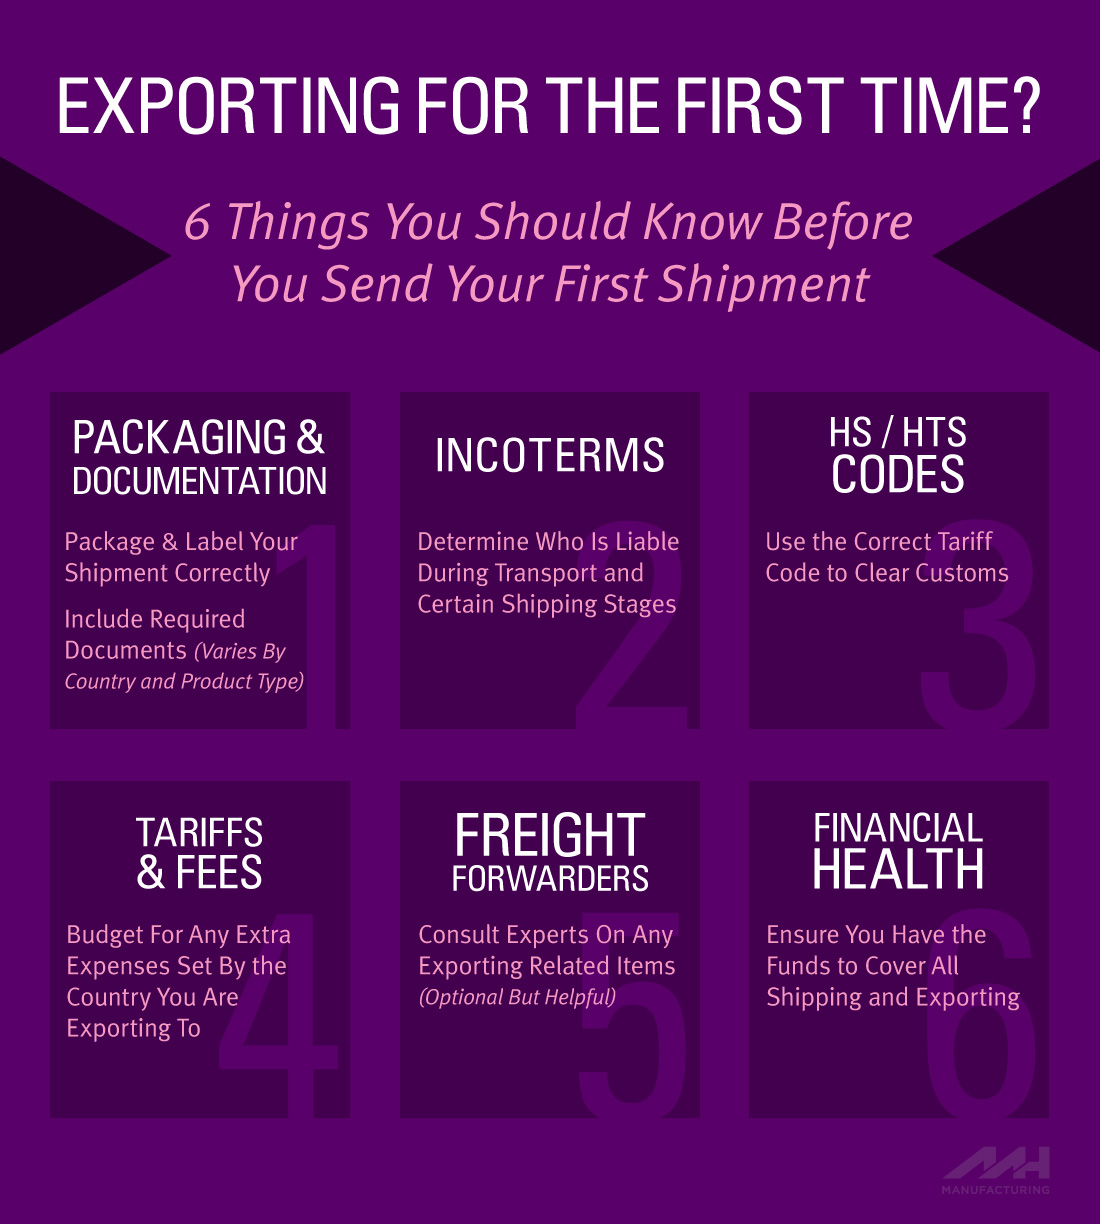 Exporting Guide - 6 Things You Should Know Before Sending Your First Shipment